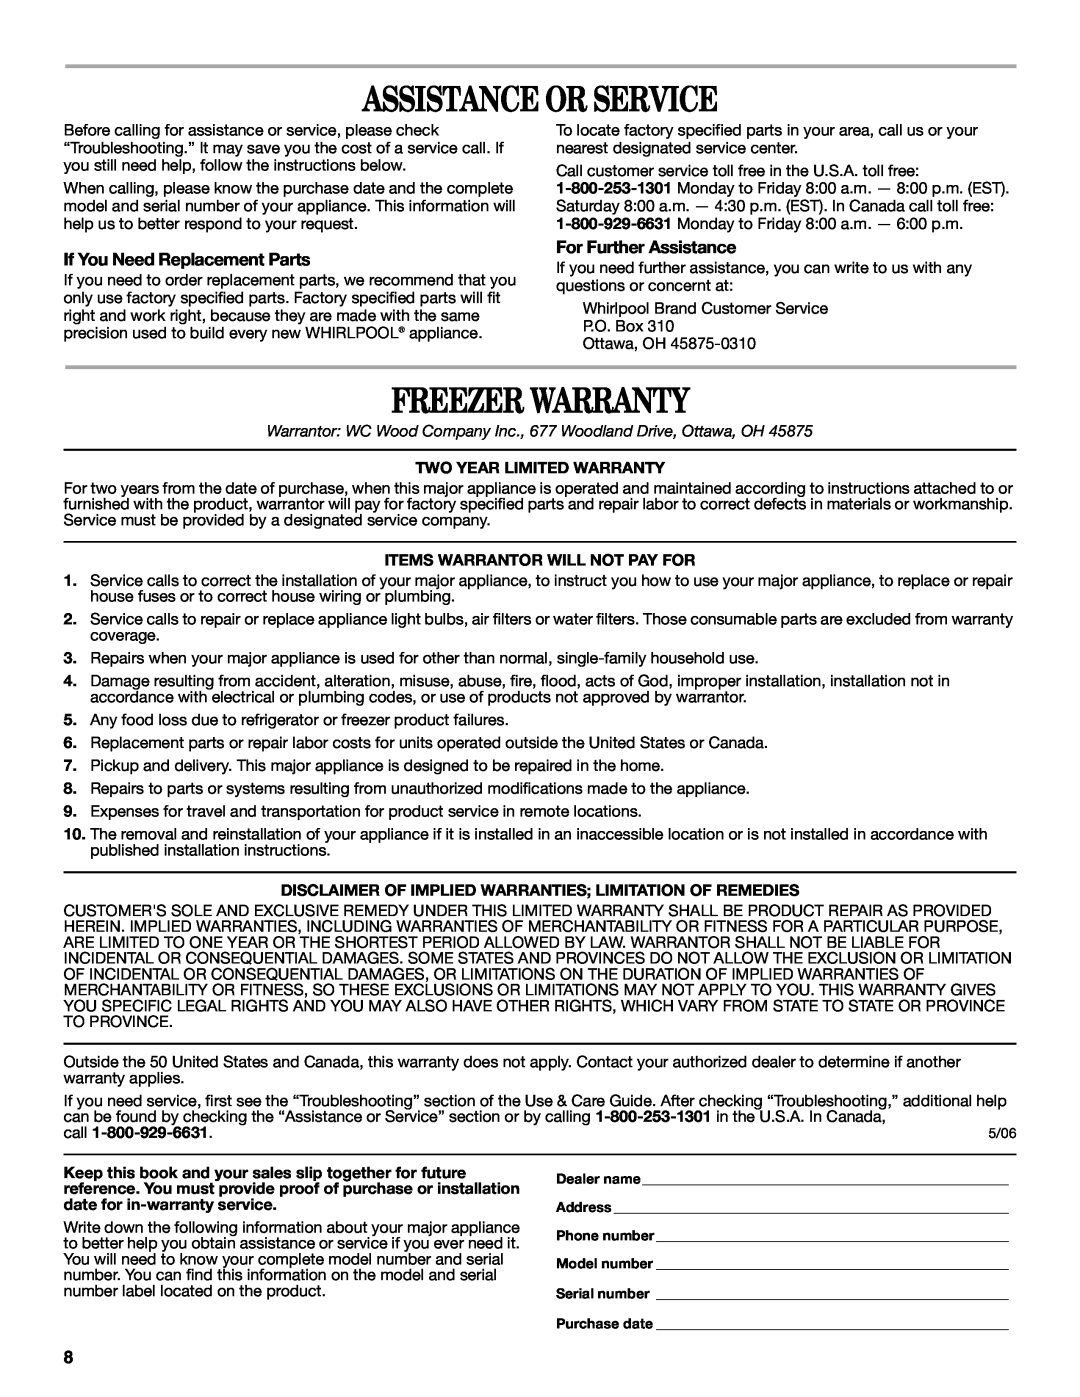 Whirlpool EH070CFXCO manual Assistance Or Service, Freezer Warranty, If You Need Replacement Parts, For Further Assistance 